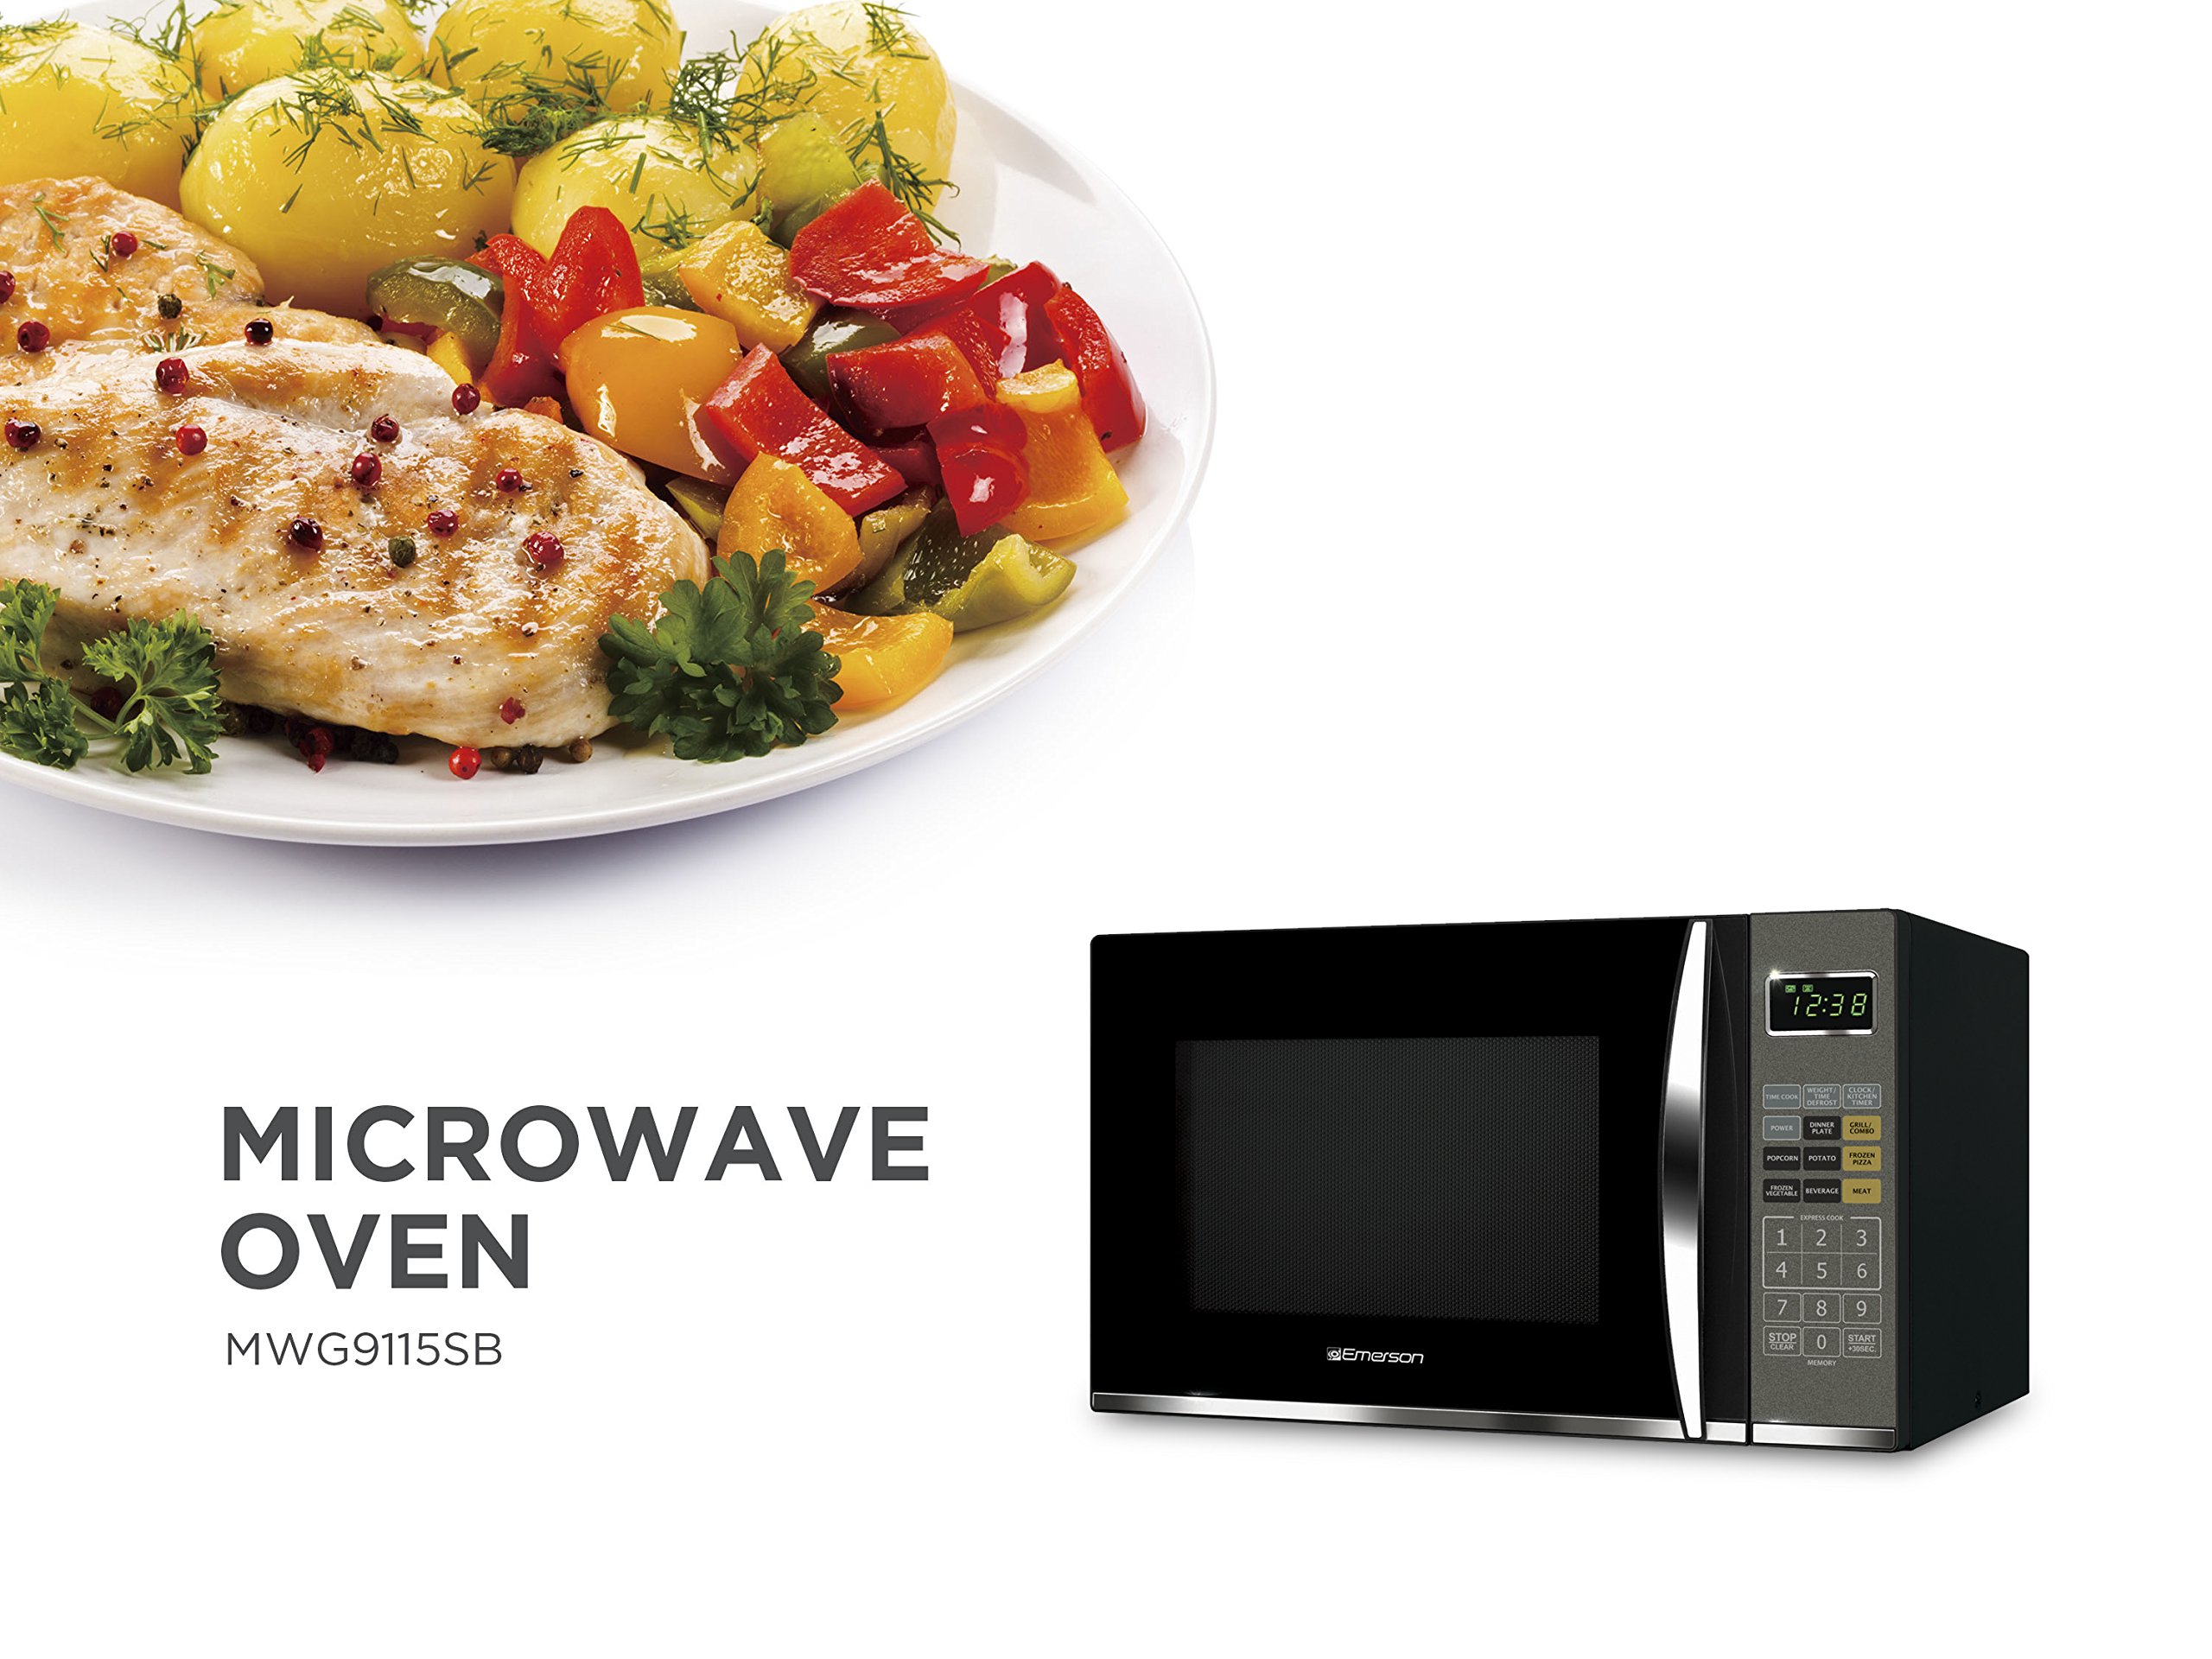 Emerson MWG9115SB-N Microwave Oven with Griller, Timer & LED Display 1100W, 11 Power Levels, 9 Pre-Programmed Settings, Removable Glass Turntable with Child Save Lock, 1.2 Cu. Ft, Stainless Steel